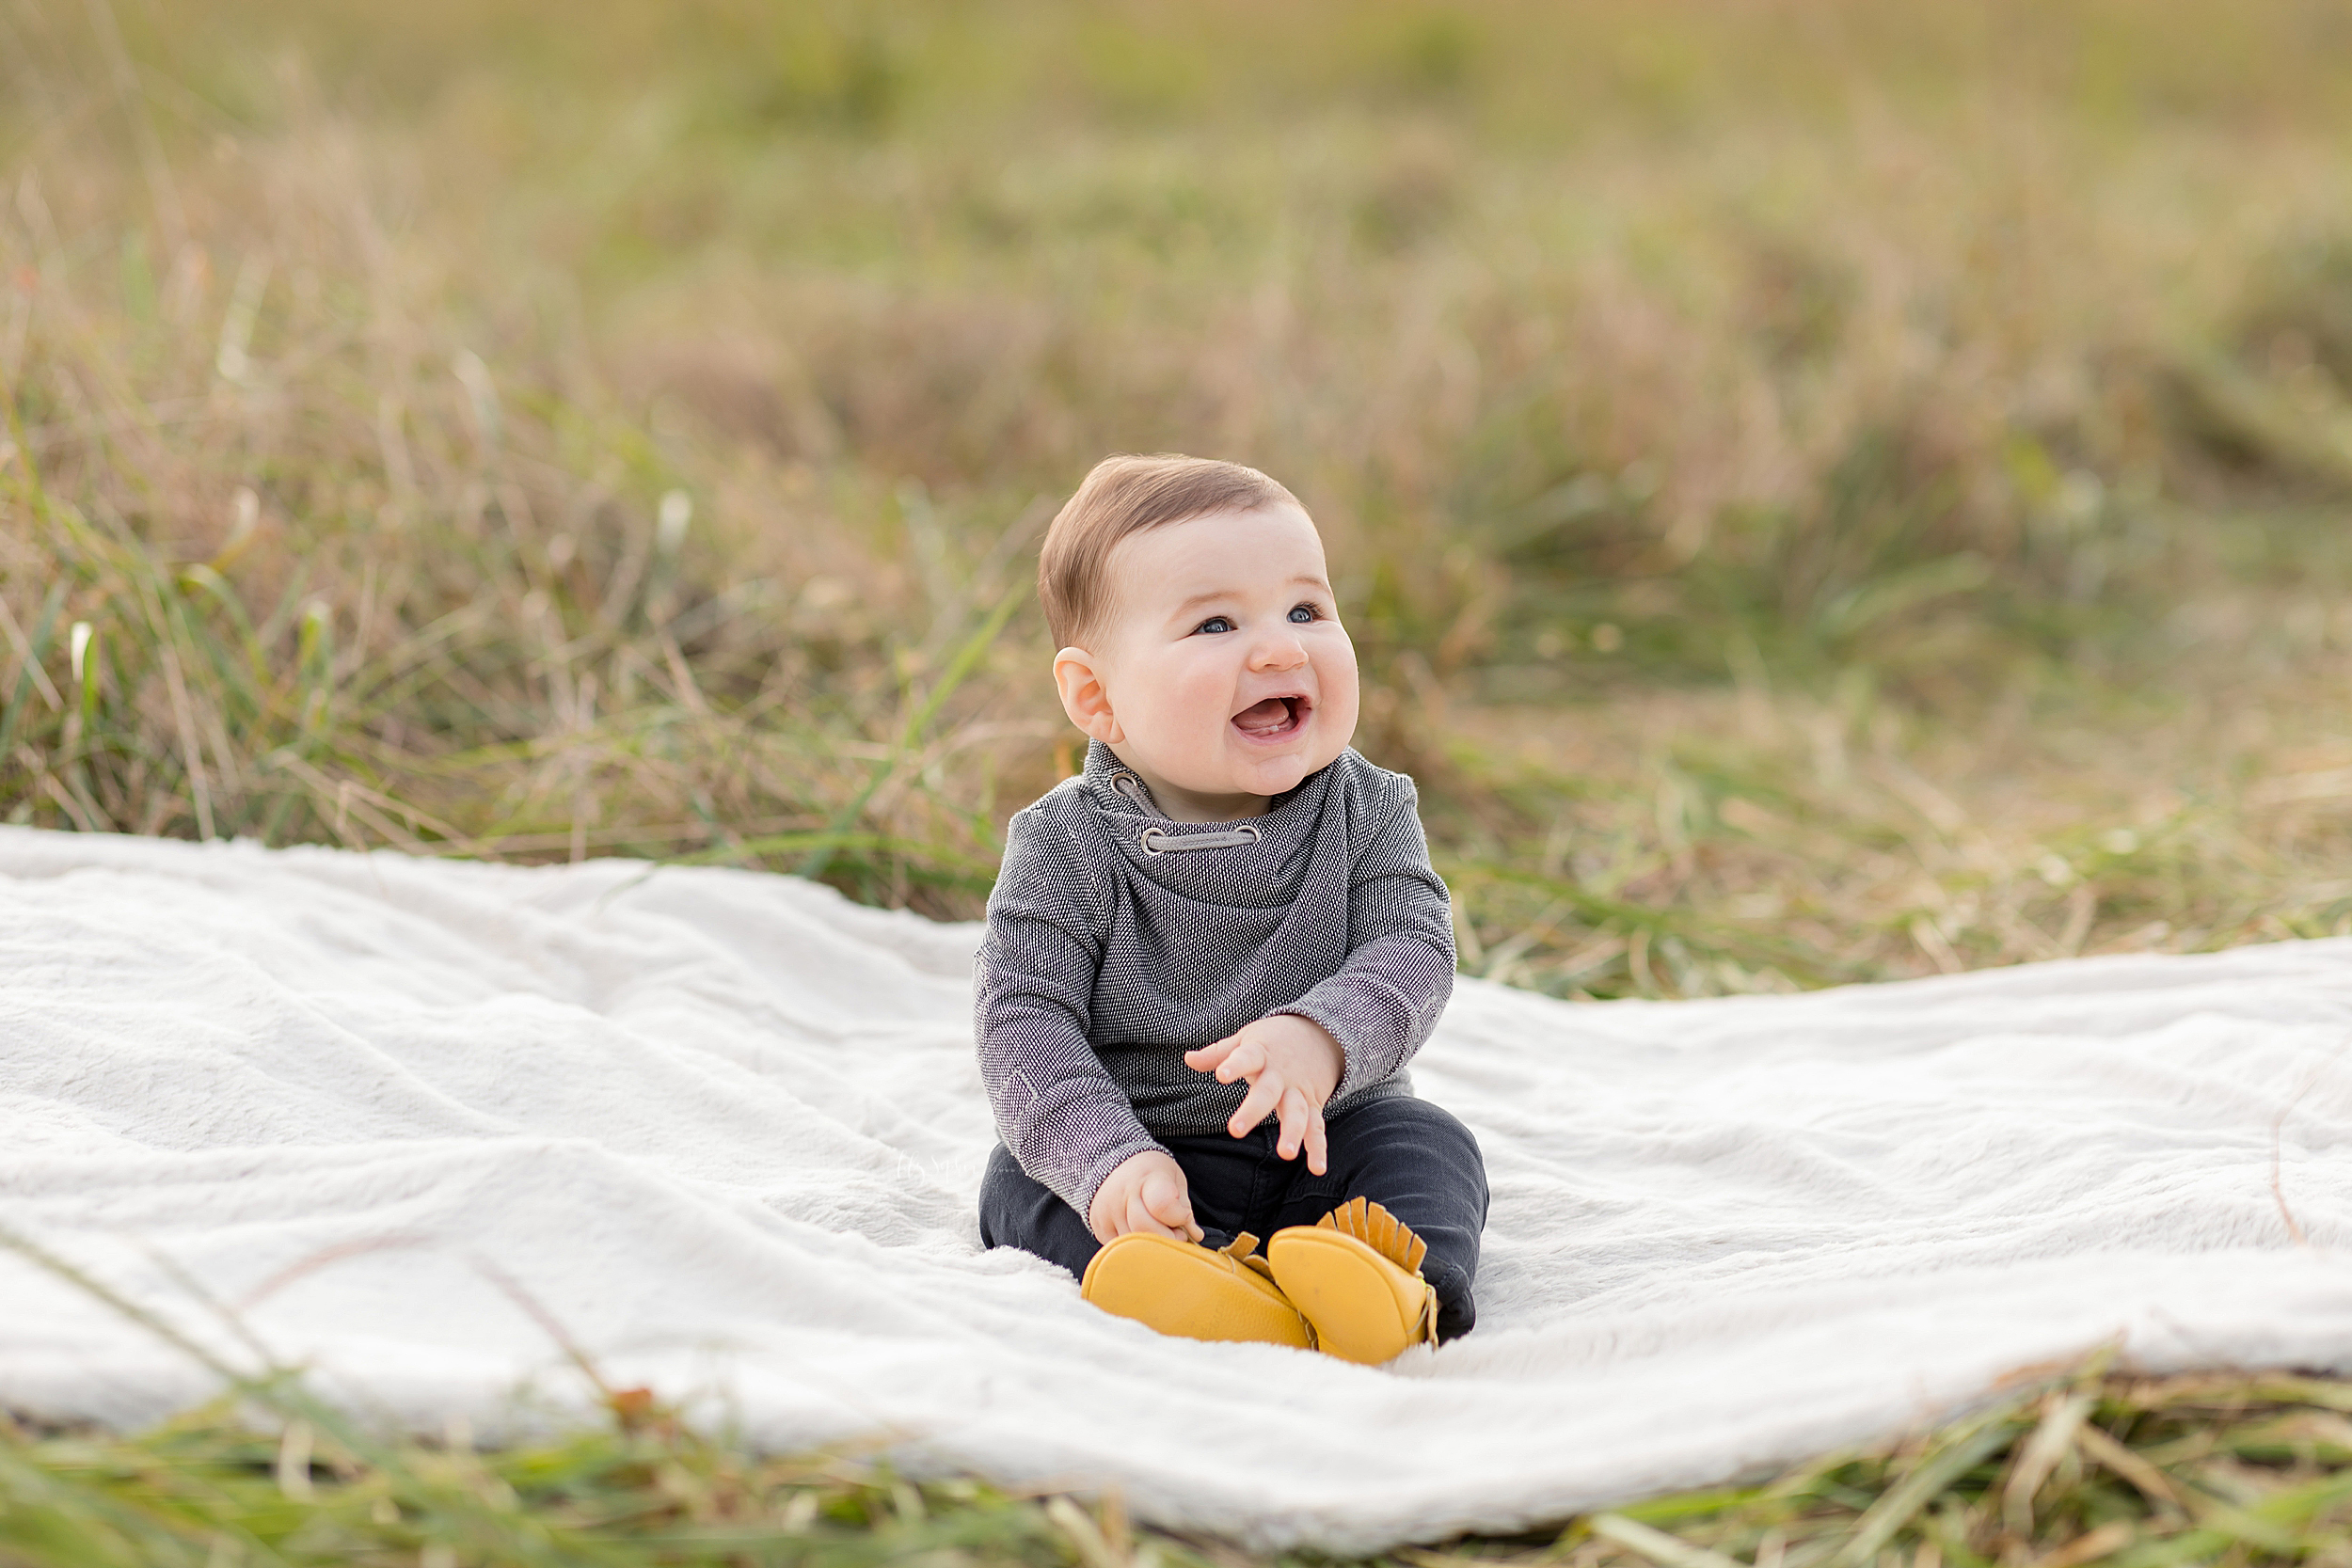 atlanta-midtown-west-end-decatur-lily-sophia-photography-family-photographer-eight-month-baby-boy-sunset-outdoor-field-family-photos_0341.jpg